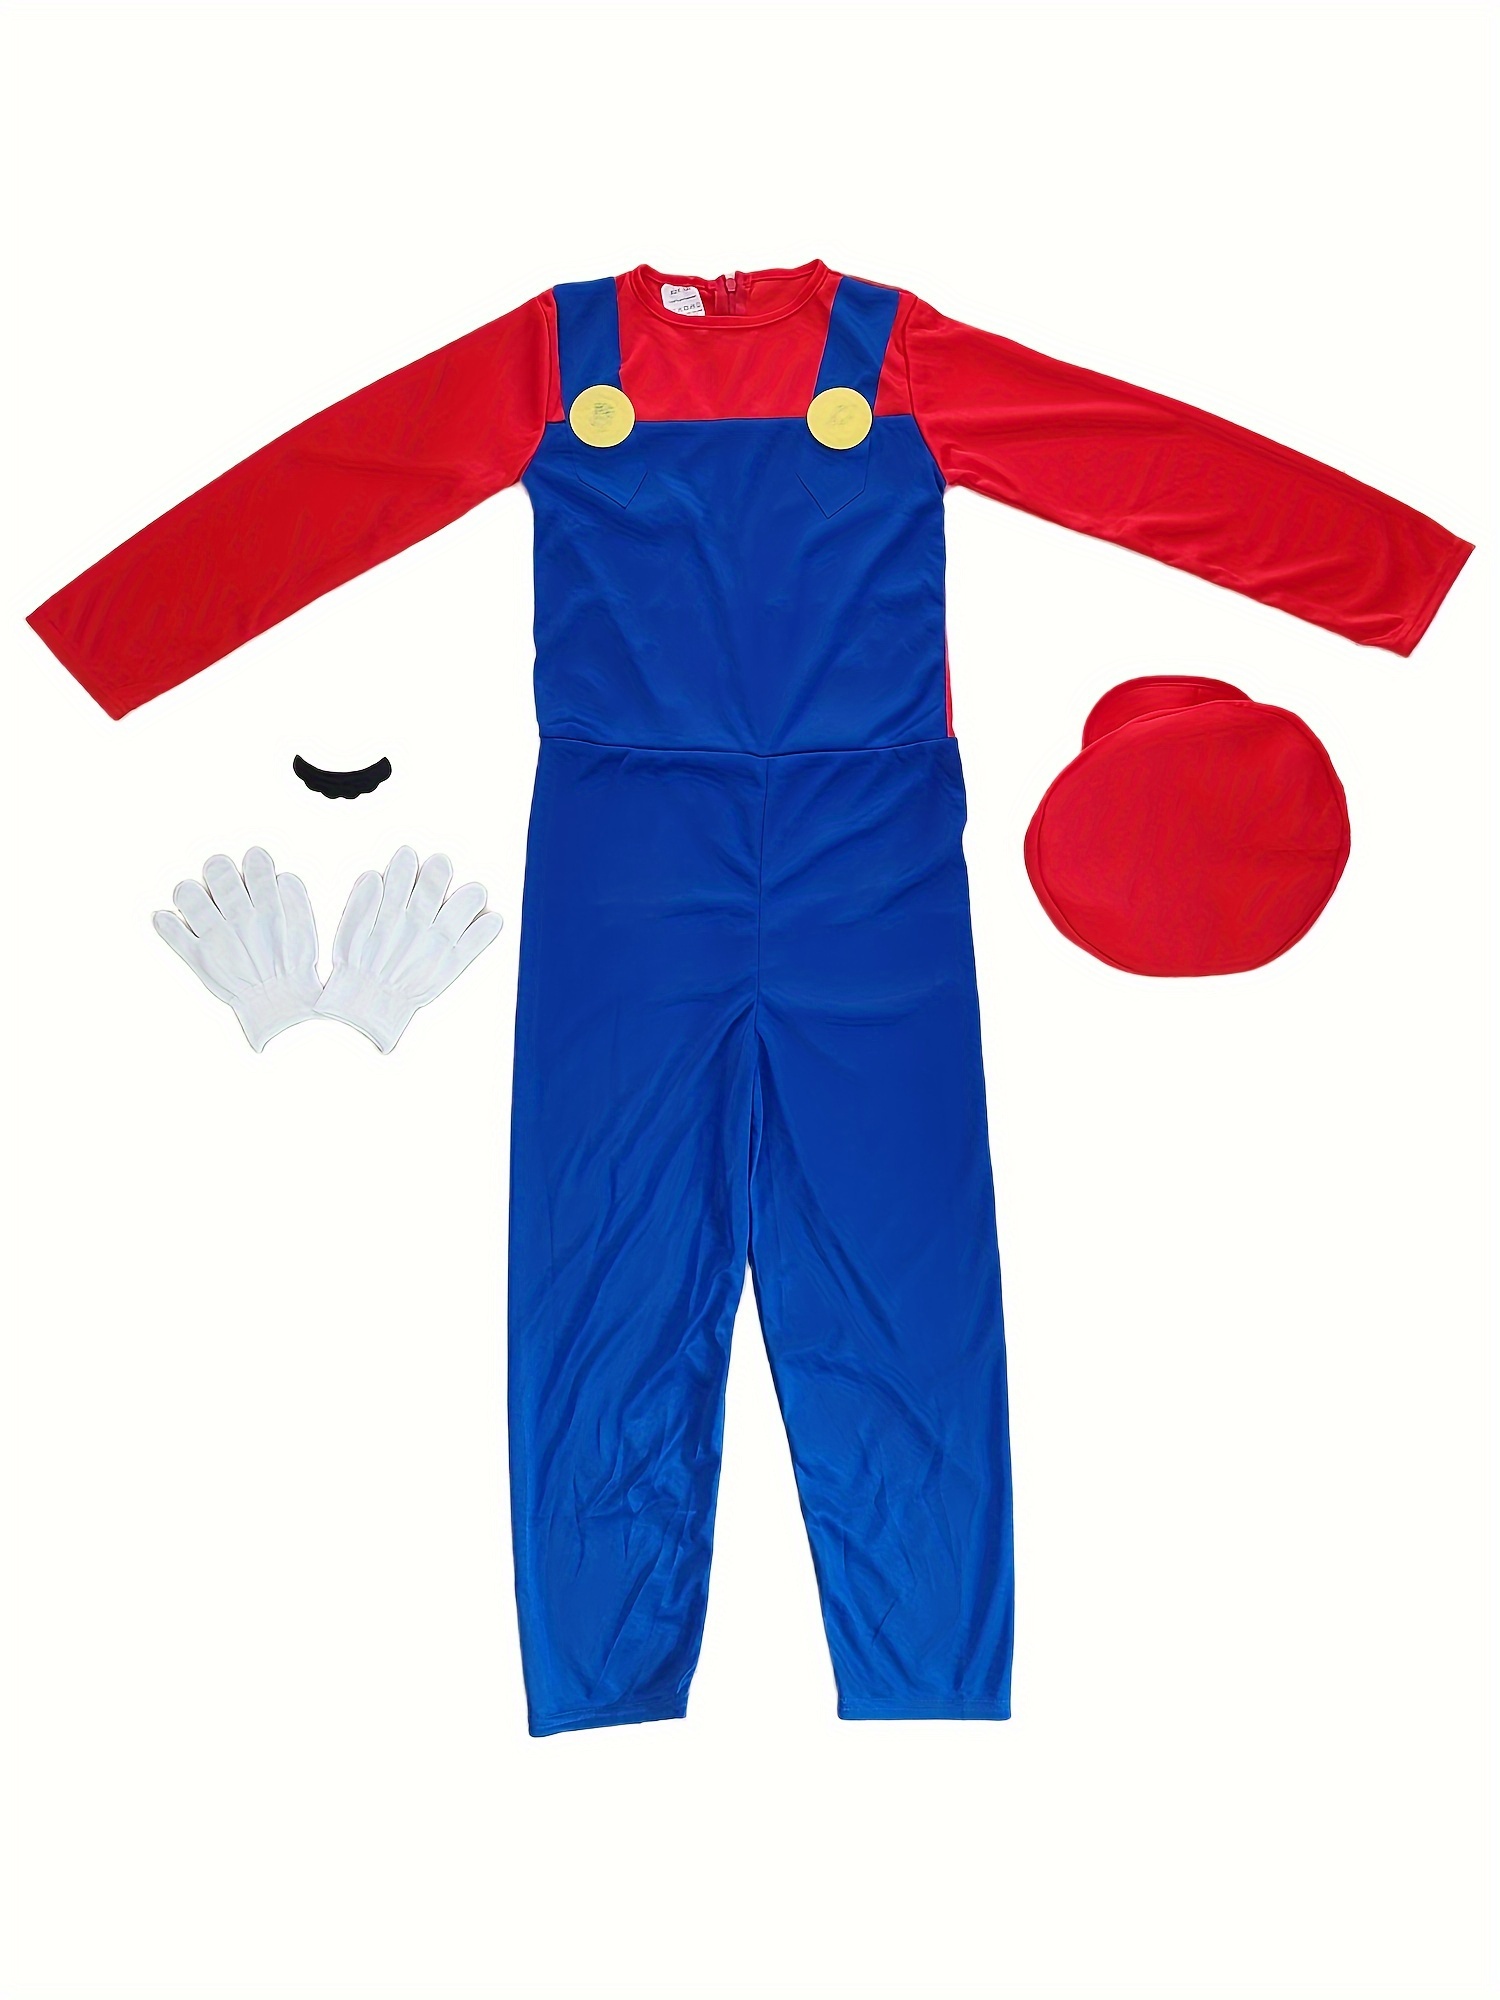 2-8T Boys Red Jumpsuit Cosplay Kids Unisex Baby Girl Party Outfit